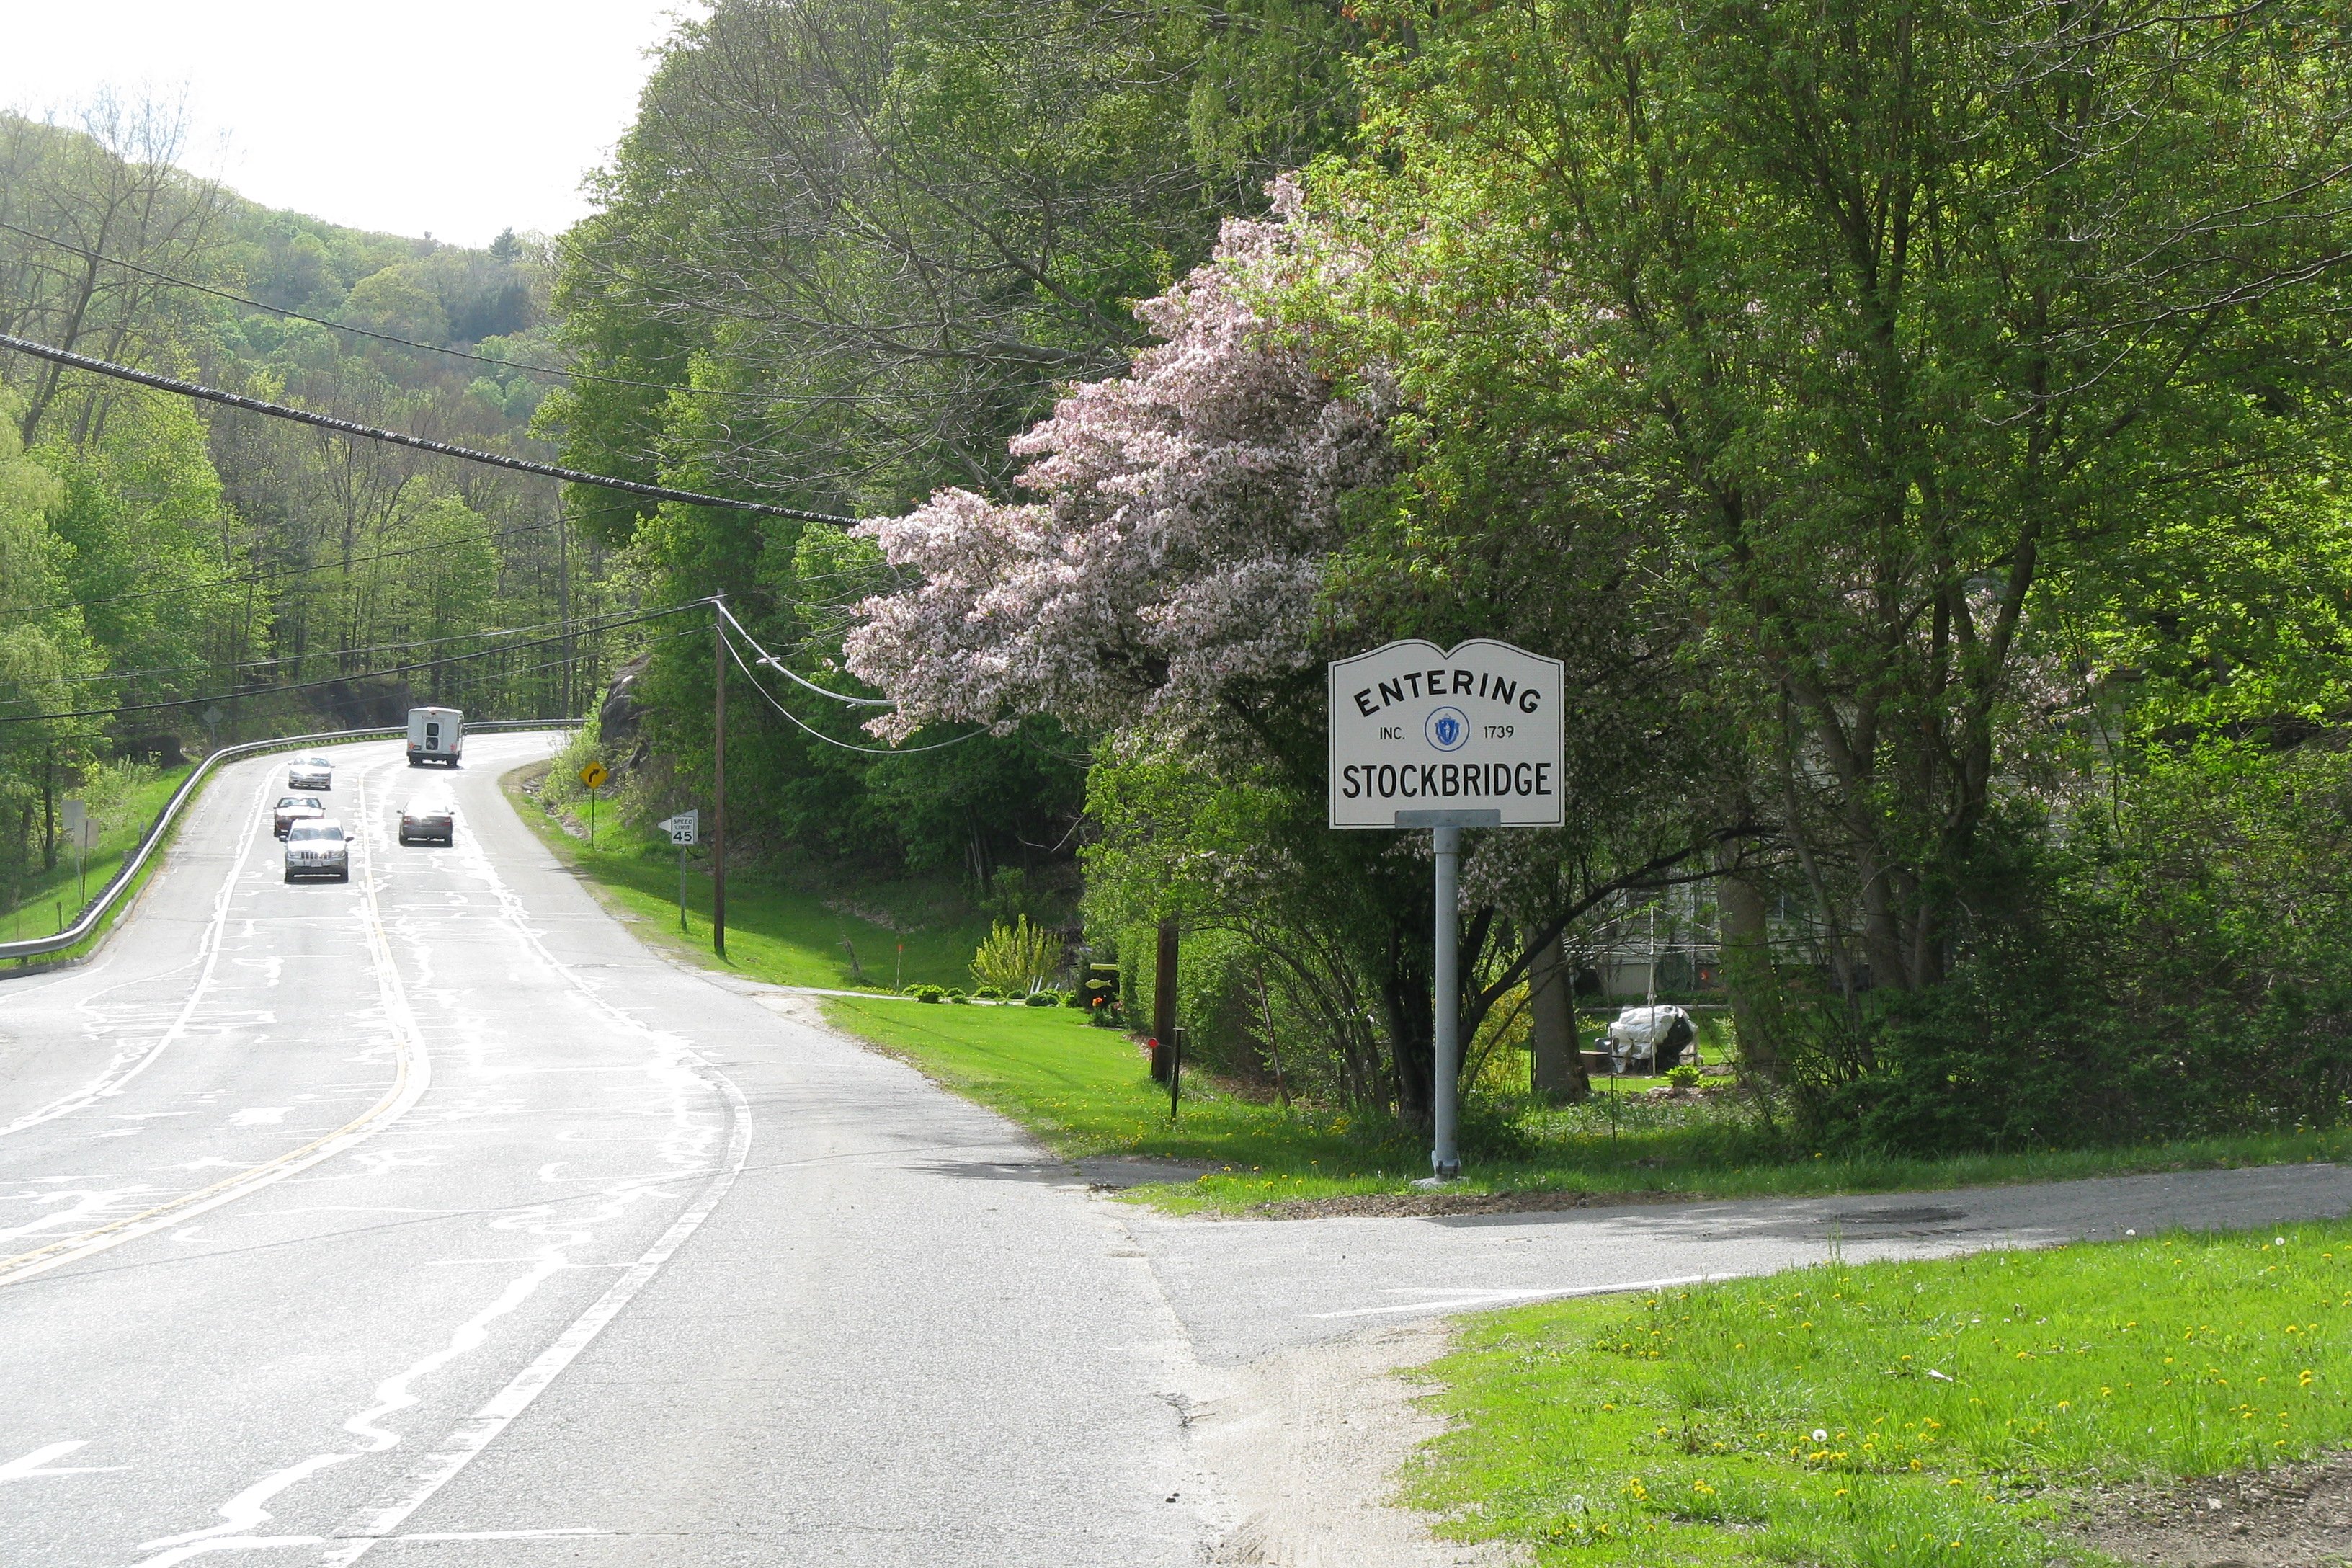 A highway with trees on both sides. Some of the trees have pink blossoms. There is a sign in the foreground that reads: Entering Stockbridge.